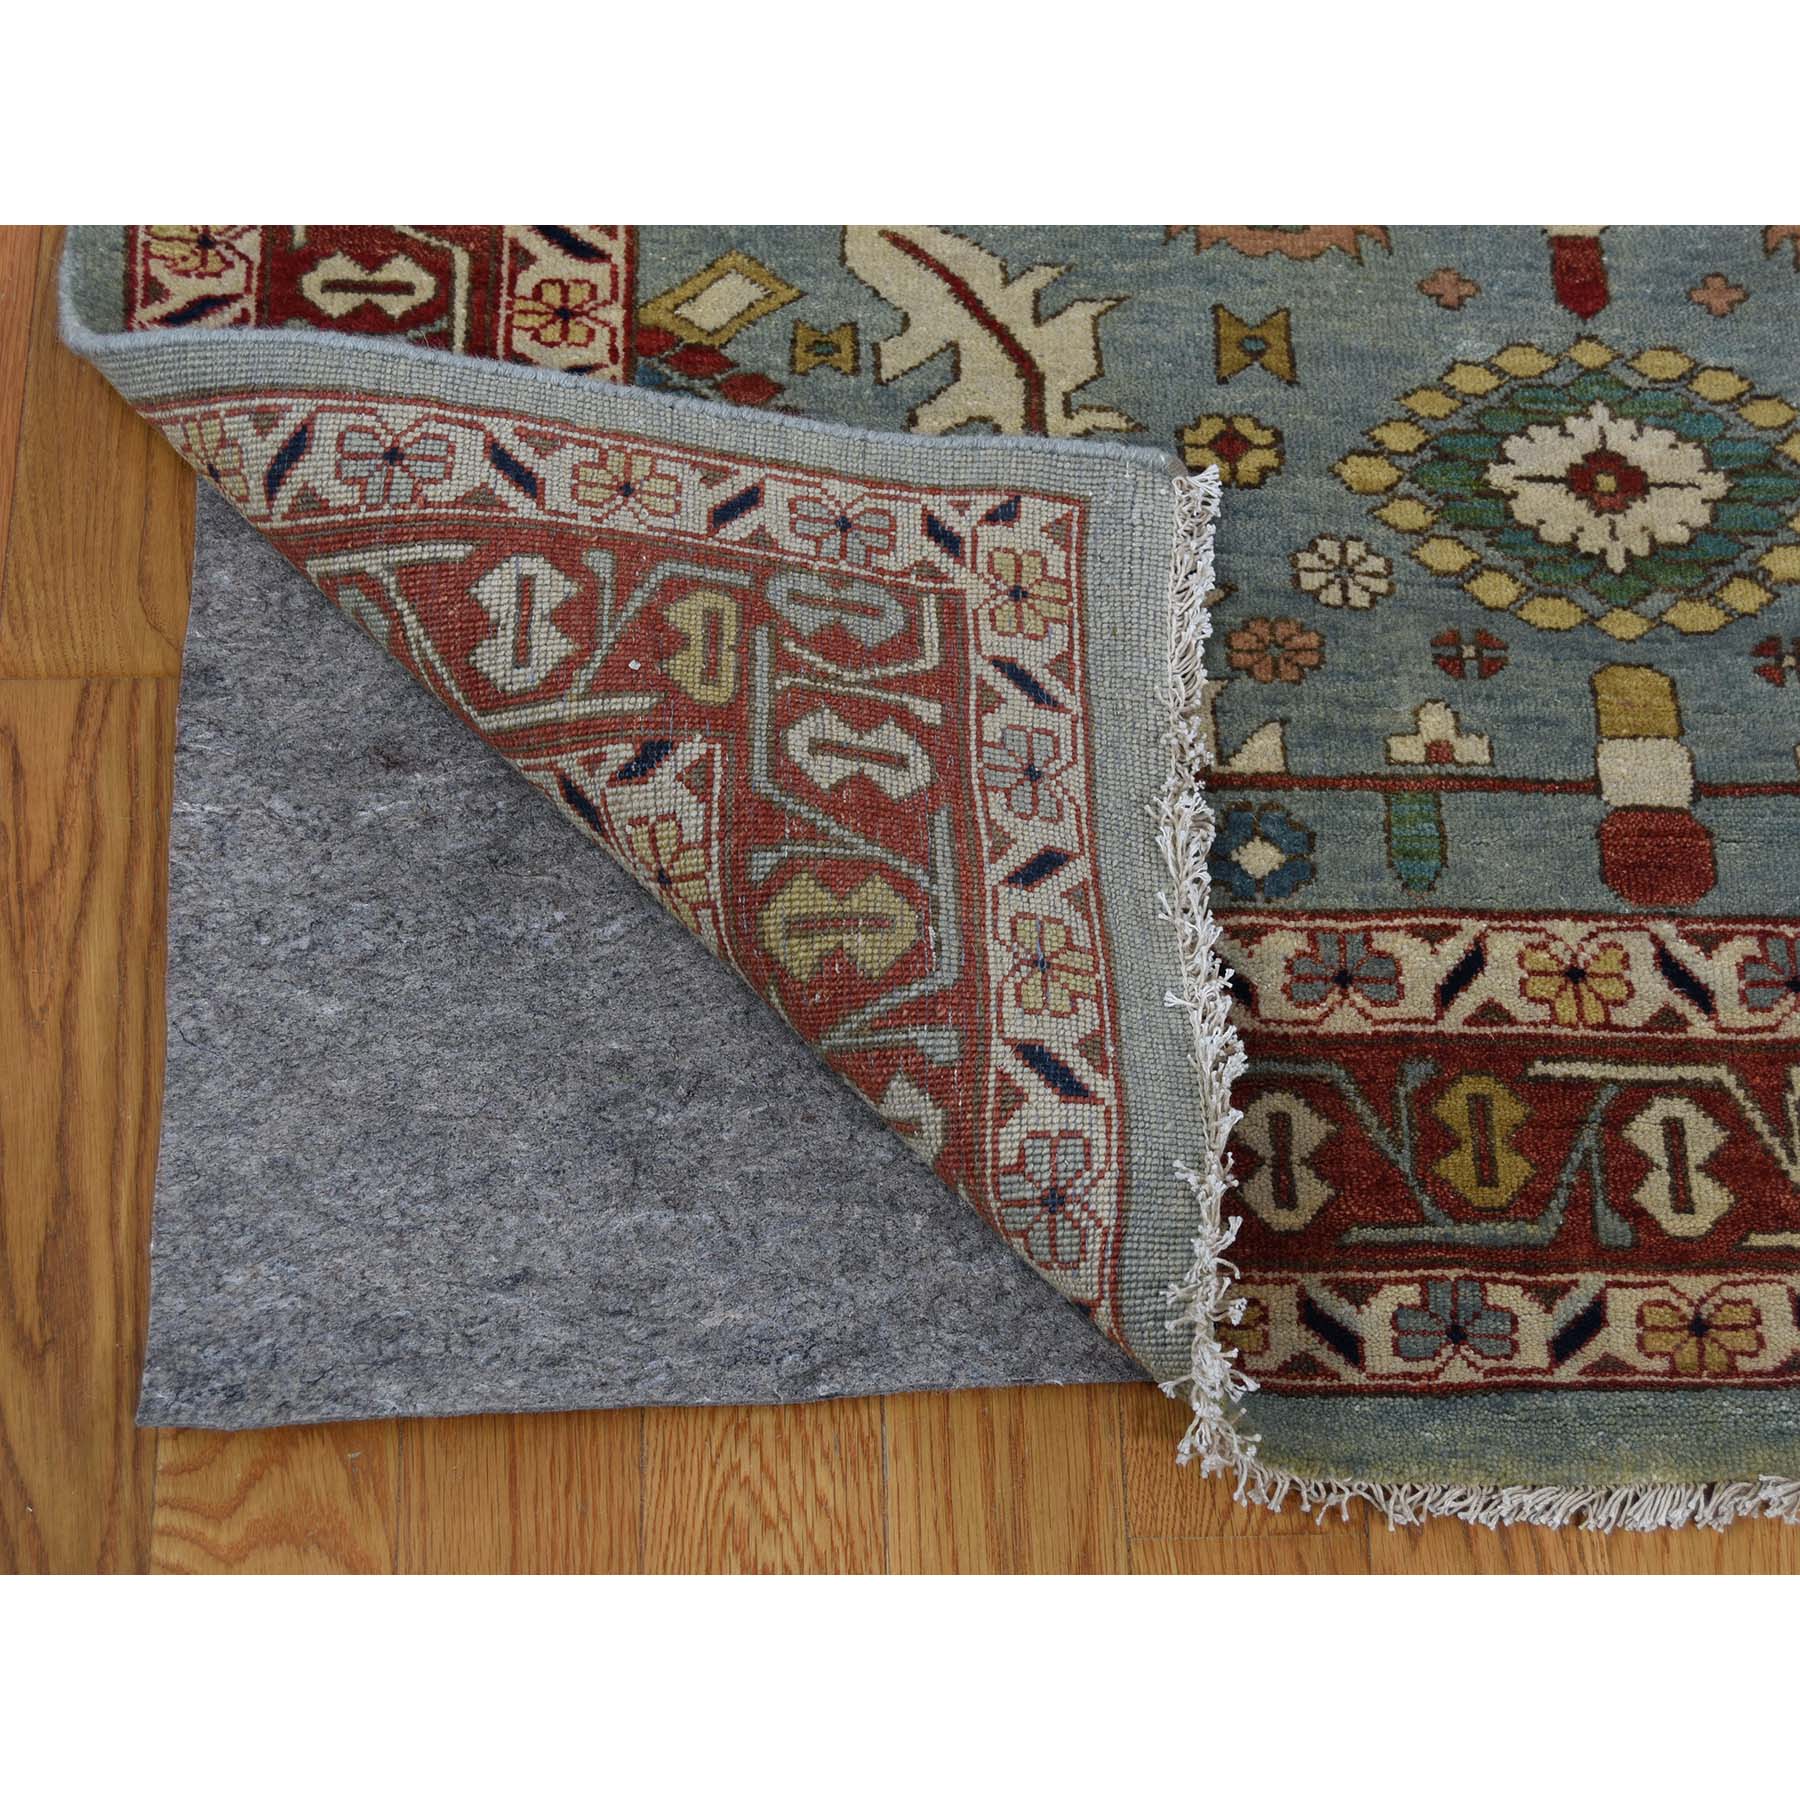 11-9 x14-10  Antiqued Bakshaish Re-creation Pure Wool Oversize Hand-Knotted Oriental Rug 